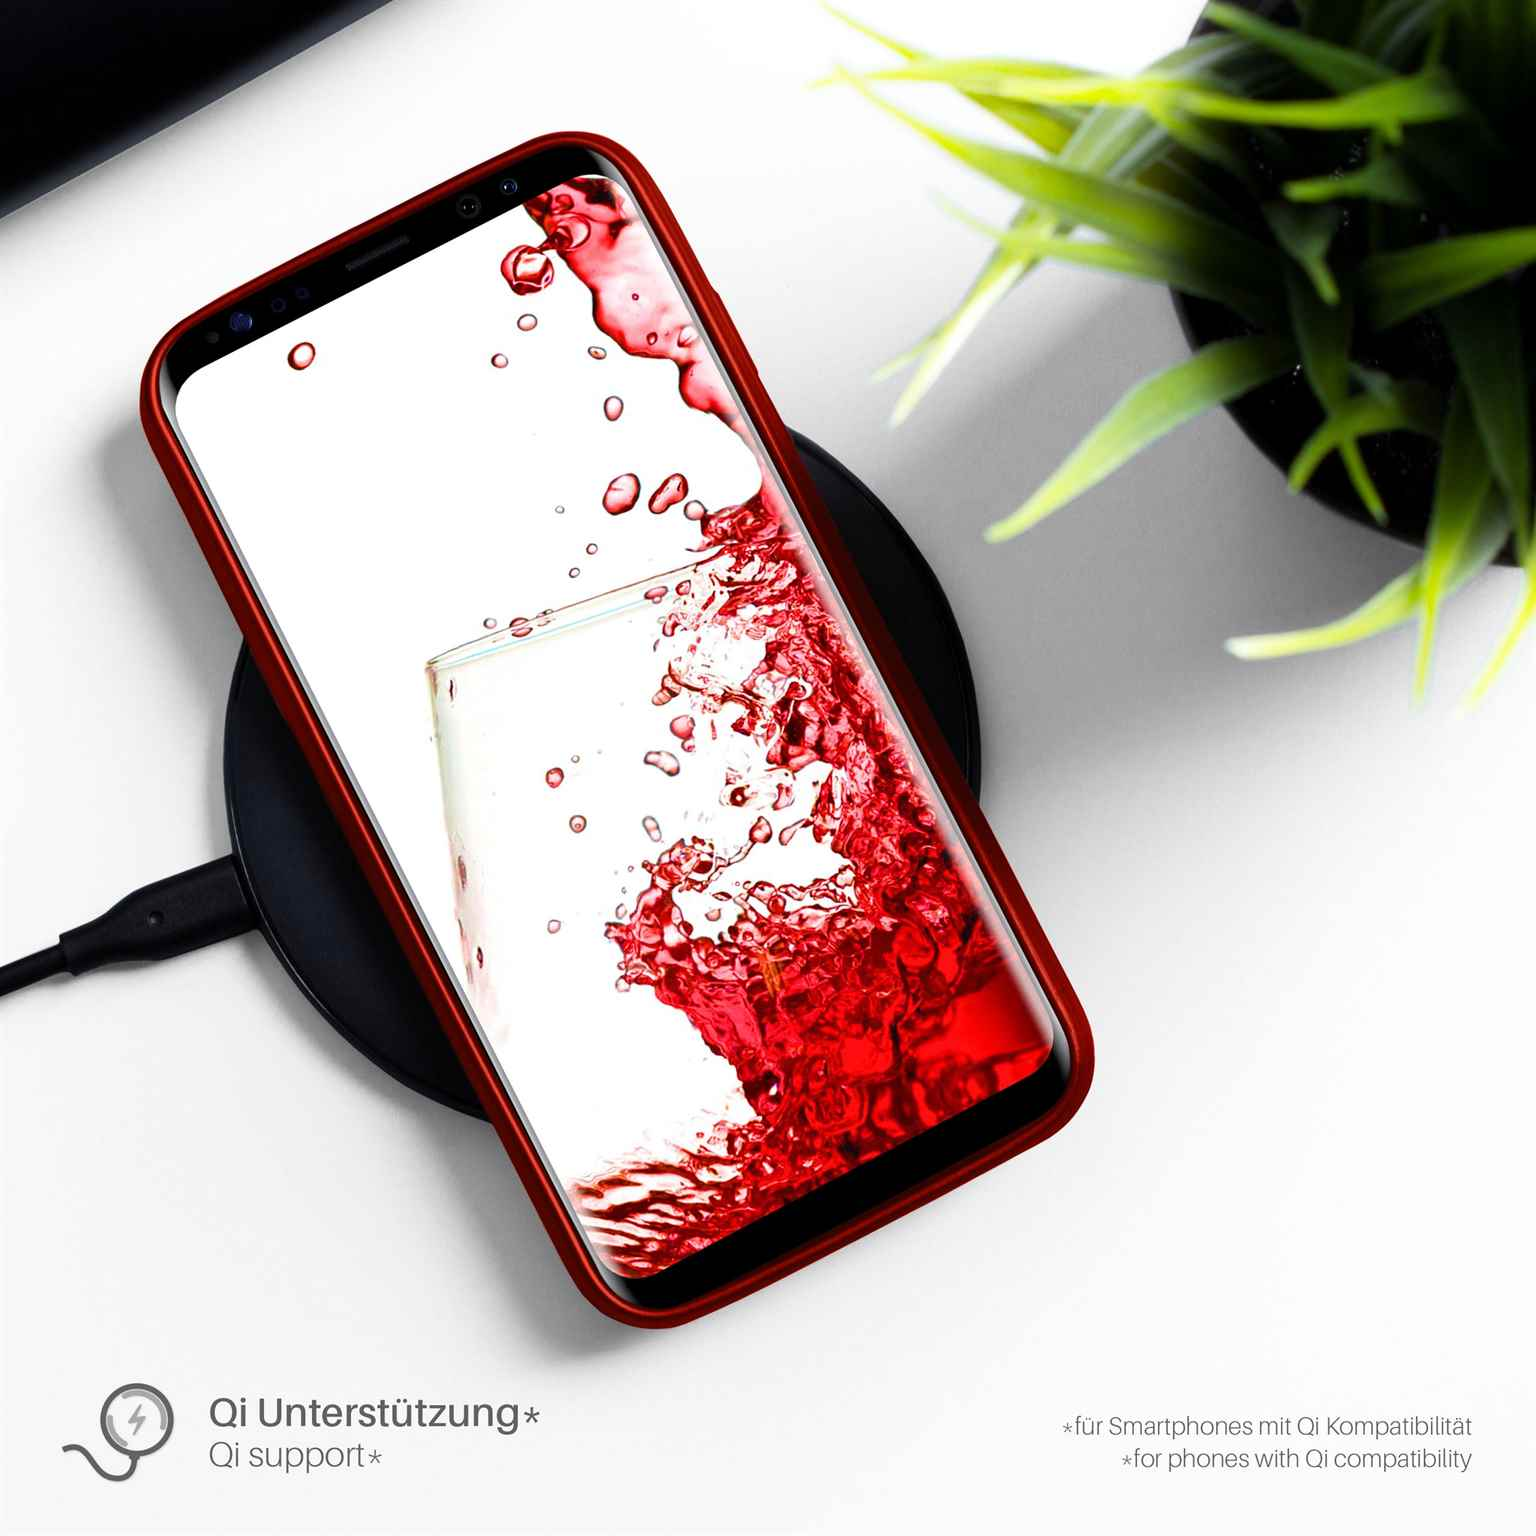 Backcover, Crimson-Red iPhone Apple, 5s, Brushed MOEX Case,